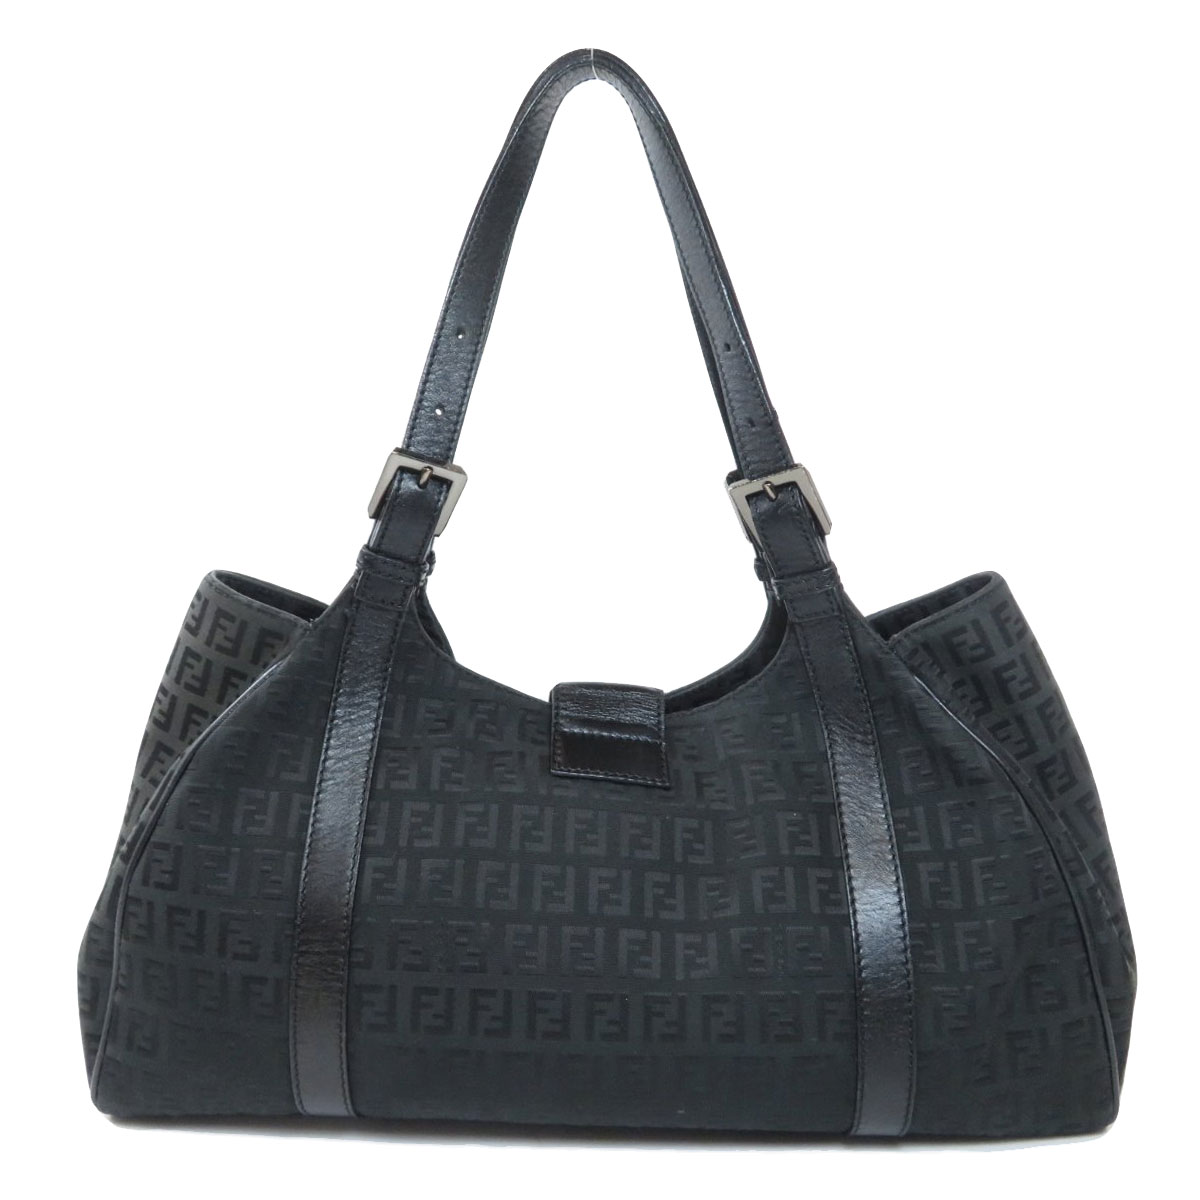 Fendi Zucca Pattern Tote Women ー The best place to buy Brand Bags Watches Jewelry, Bramo!